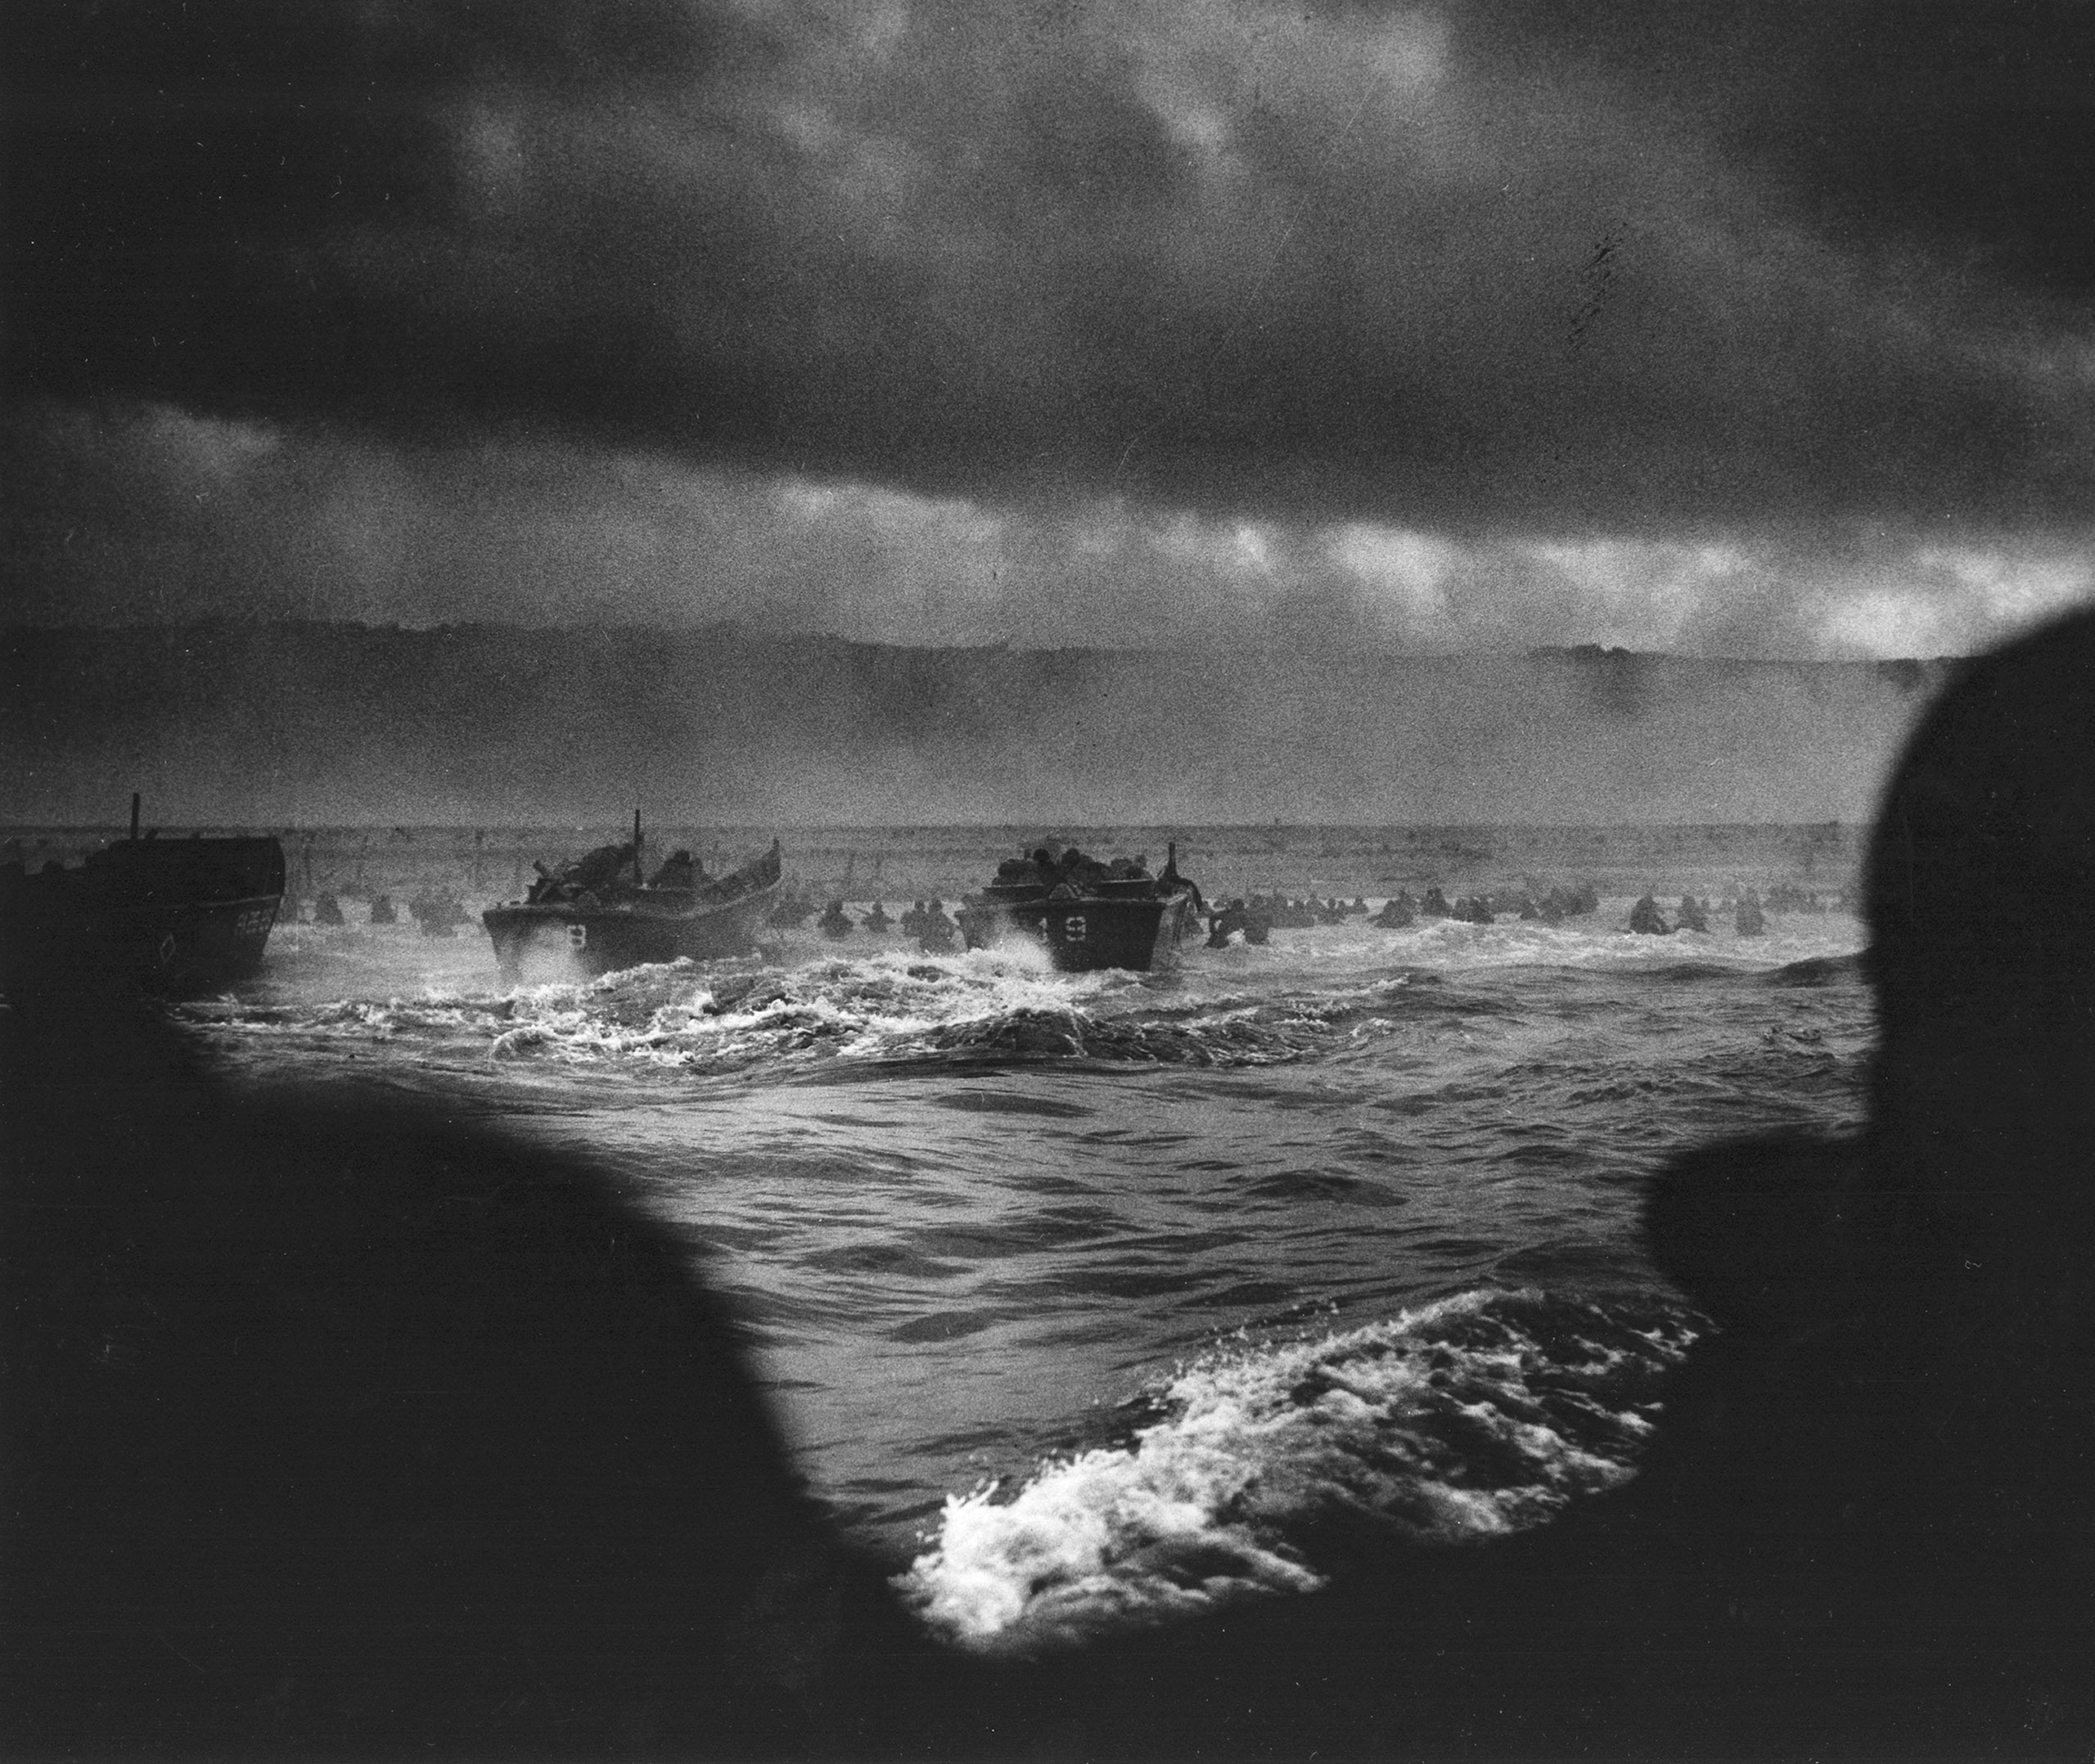 View from a boat as American boats and soldiers storm the shores on D-Day.